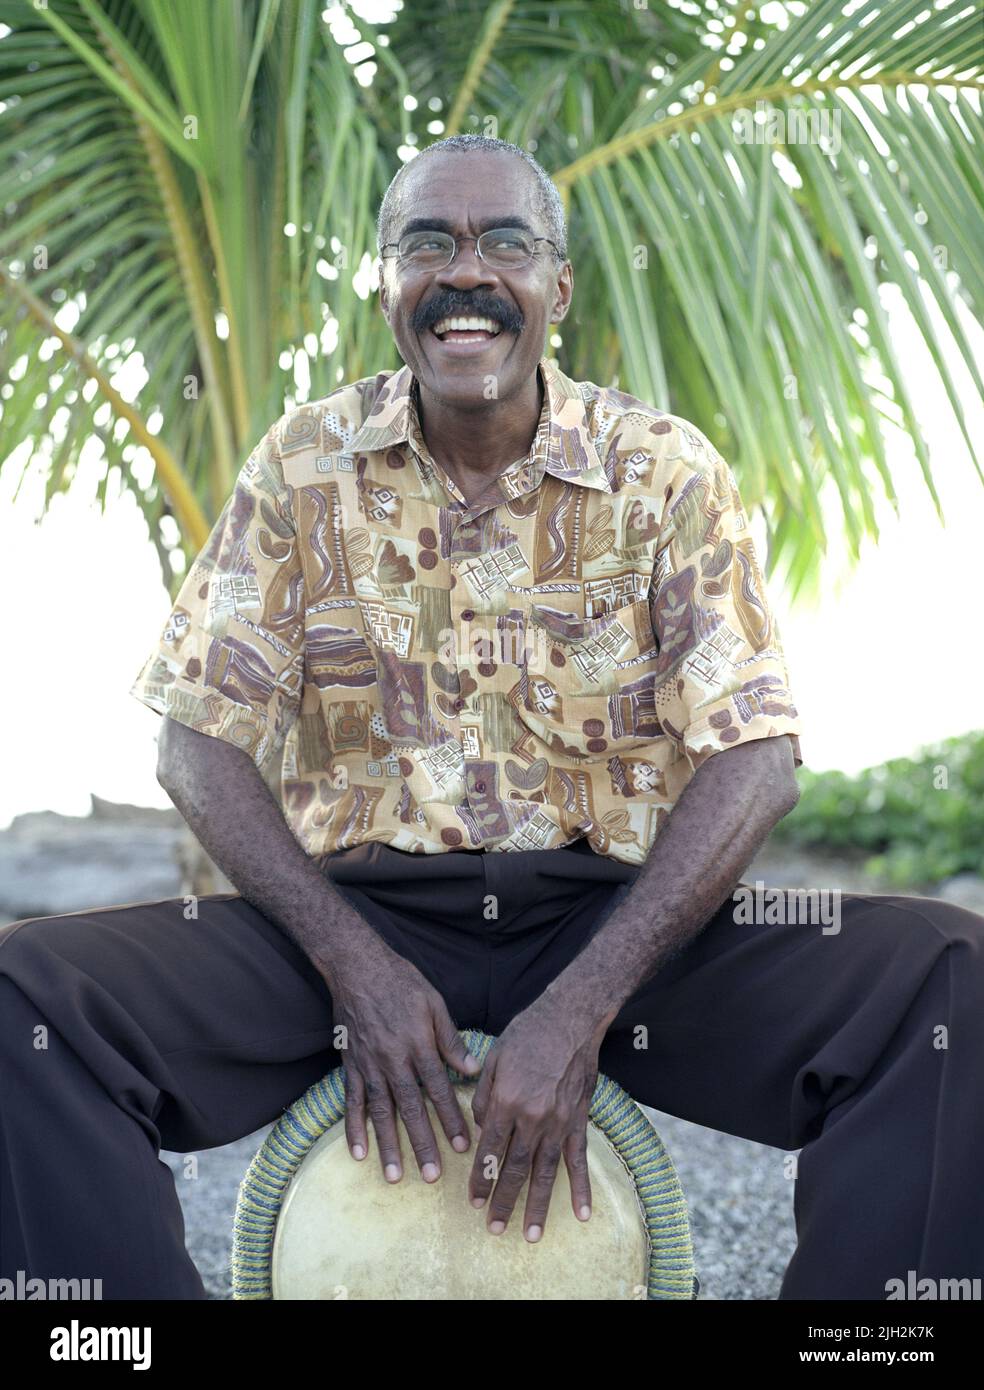 A Bele drummer plays by the beach. Fort de France, Martinique. French Caribbean. Stock Photo